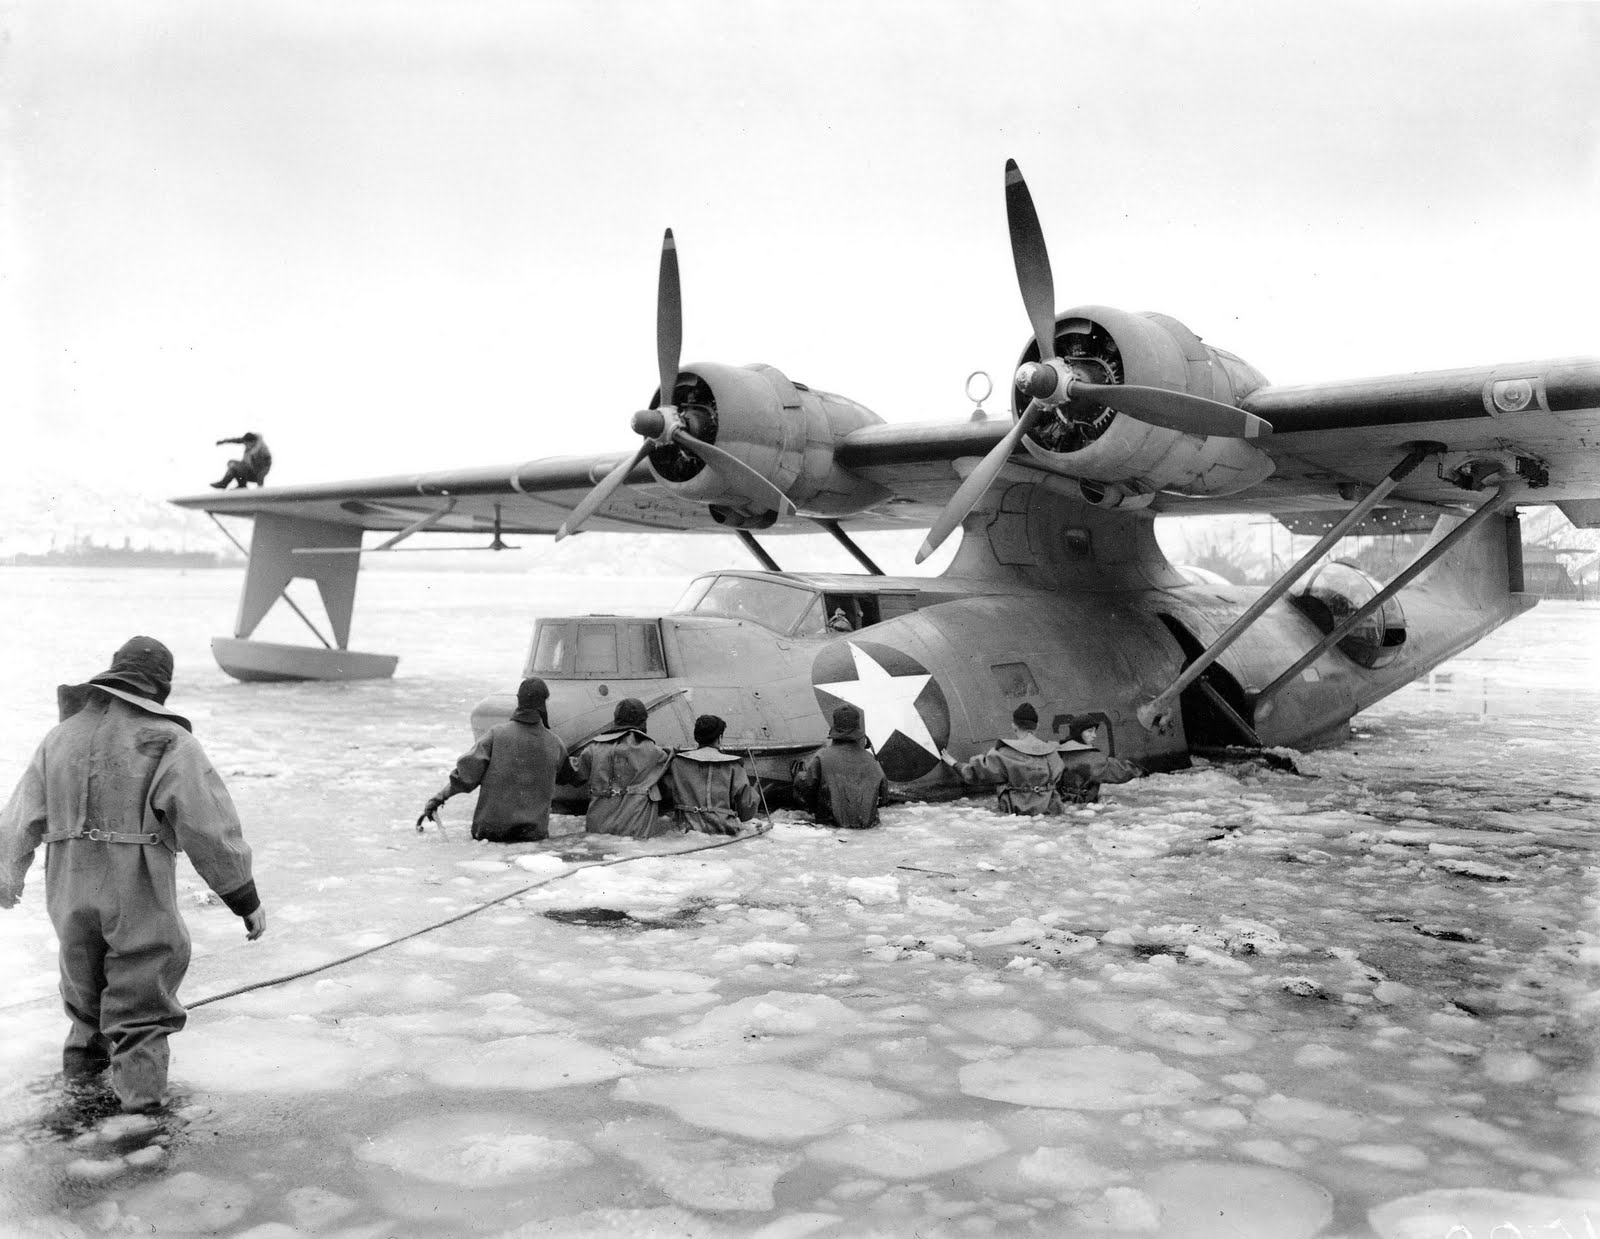 US Navy personnel freeing a PBY-5A Catalina aircraft from frozen waters in the Aleutian Islands at Kodiak Bay, US Territory of Alaska, May 1942-Jan 1943